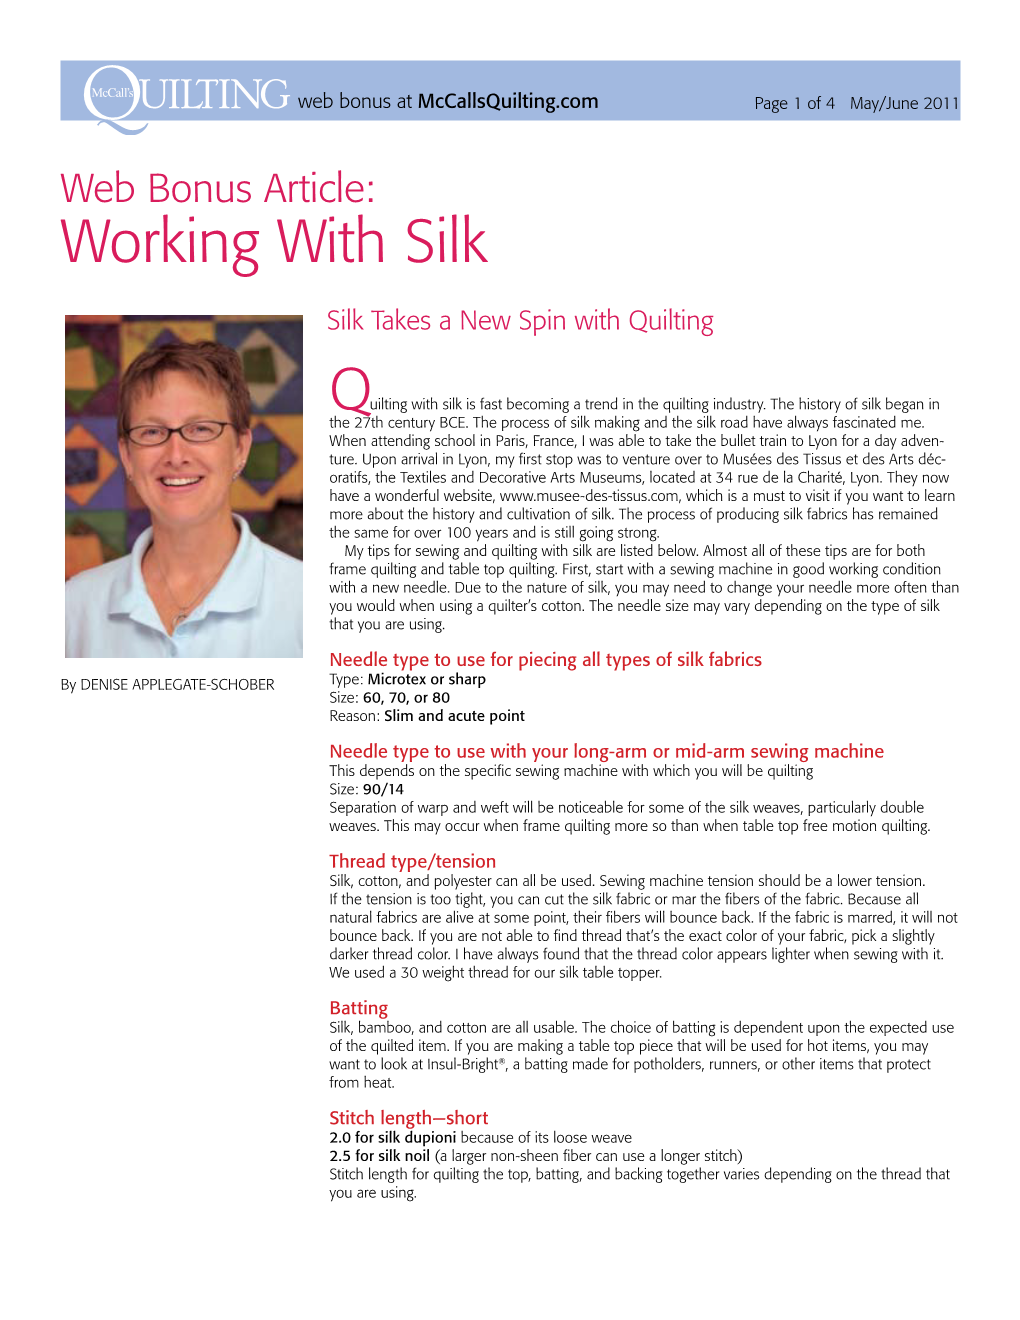 Working with Silk